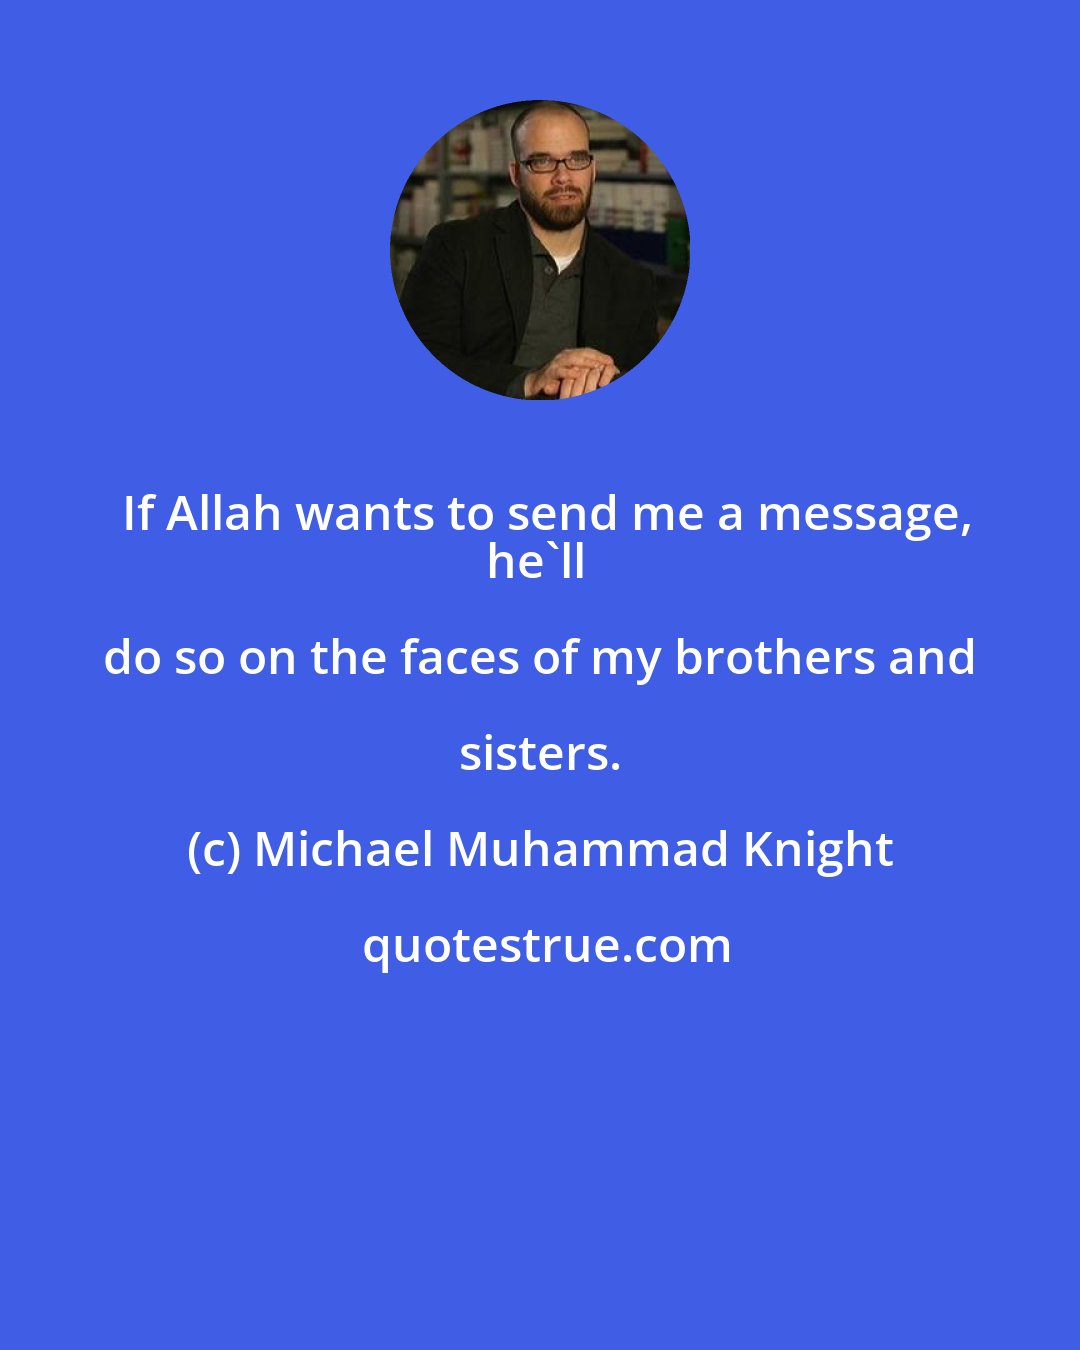 Michael Muhammad Knight: If Allah wants to send me a message,
he'll do so on the faces of my brothers and sisters.